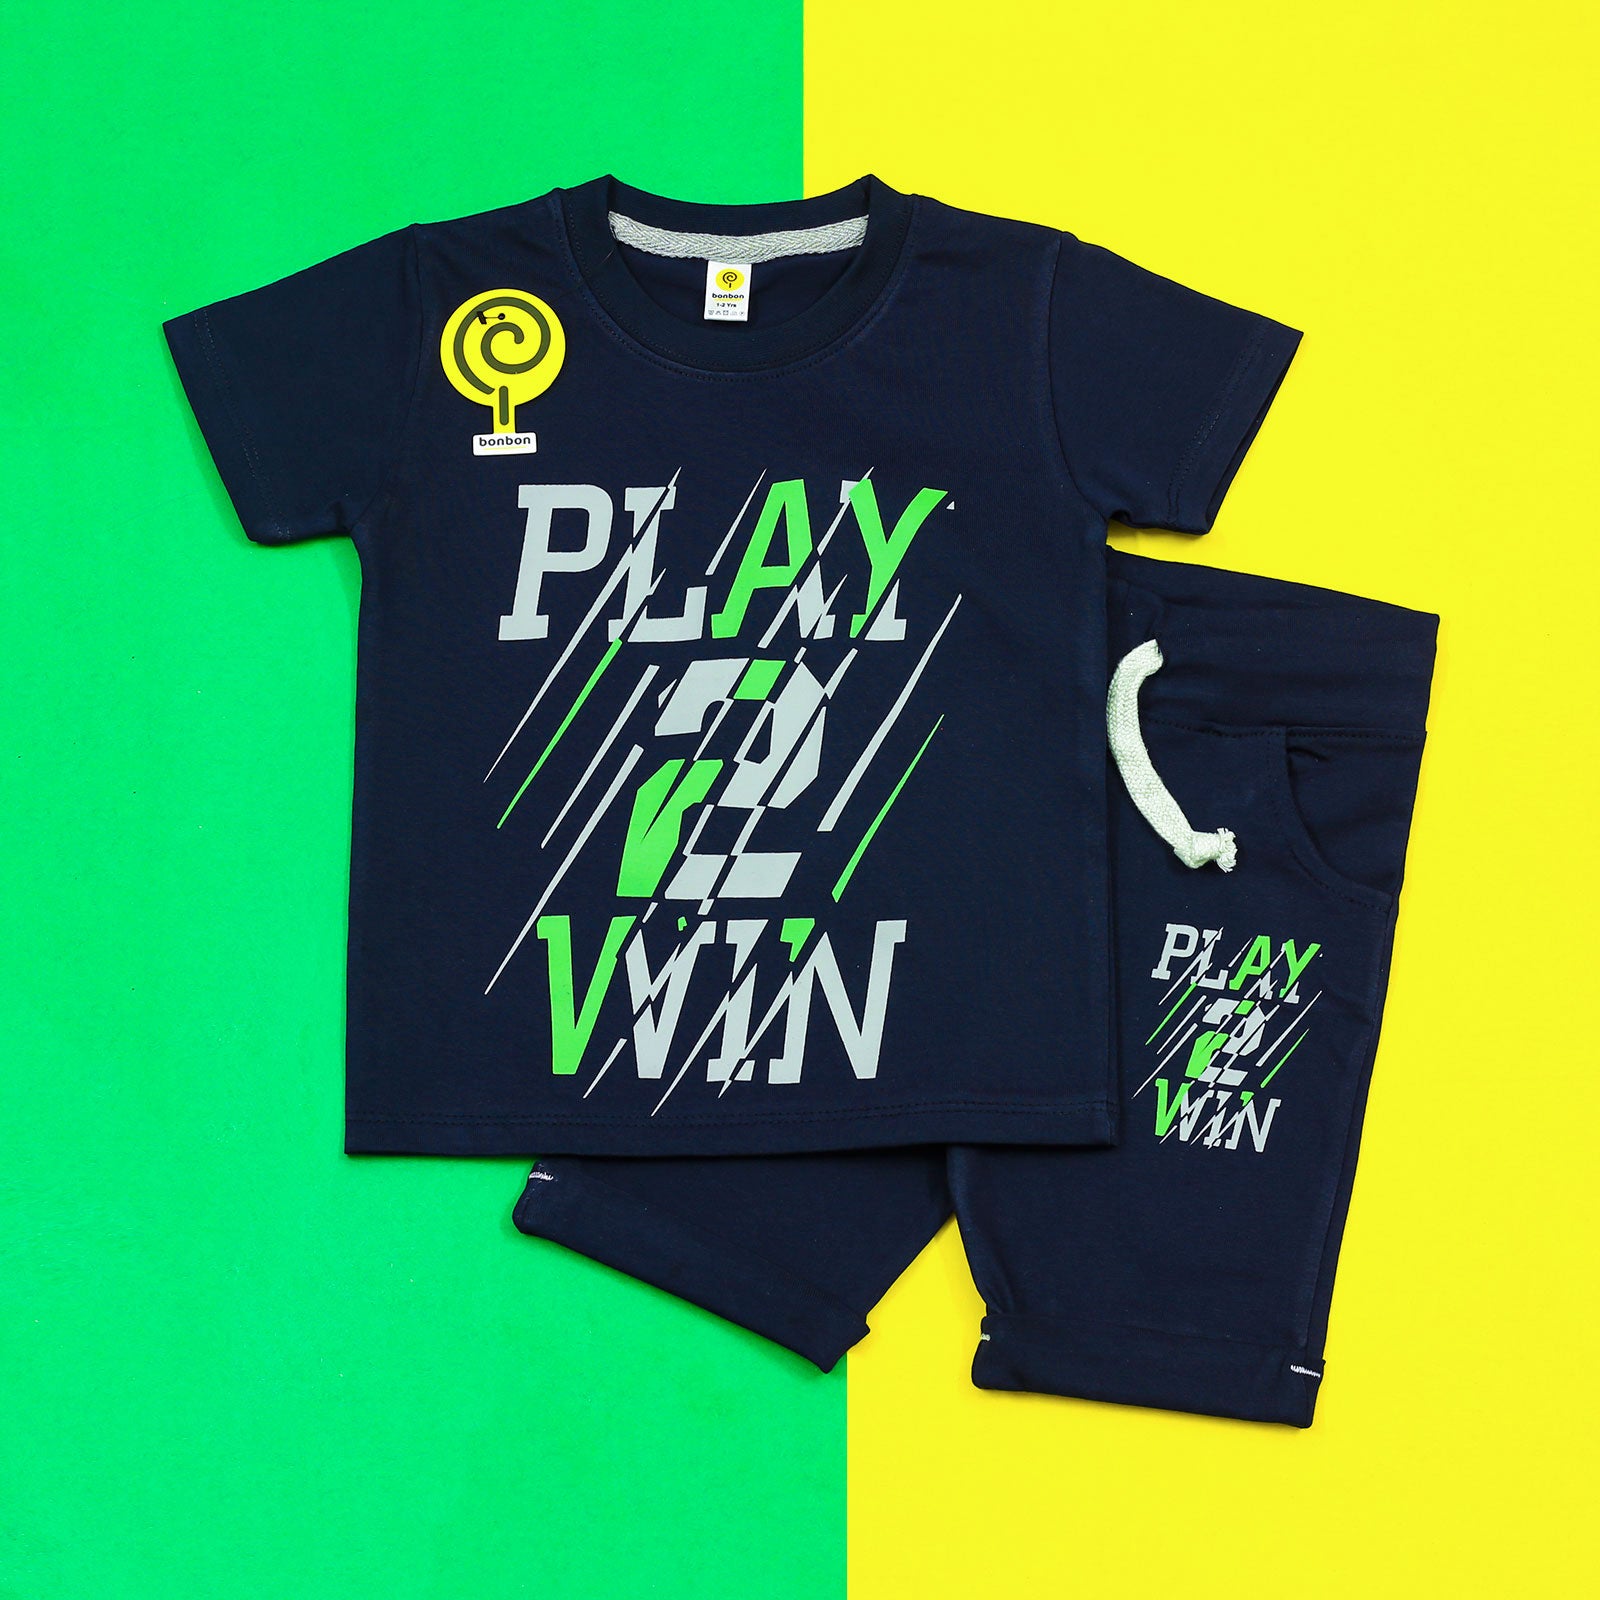 Play 2 Win Navy Twinset